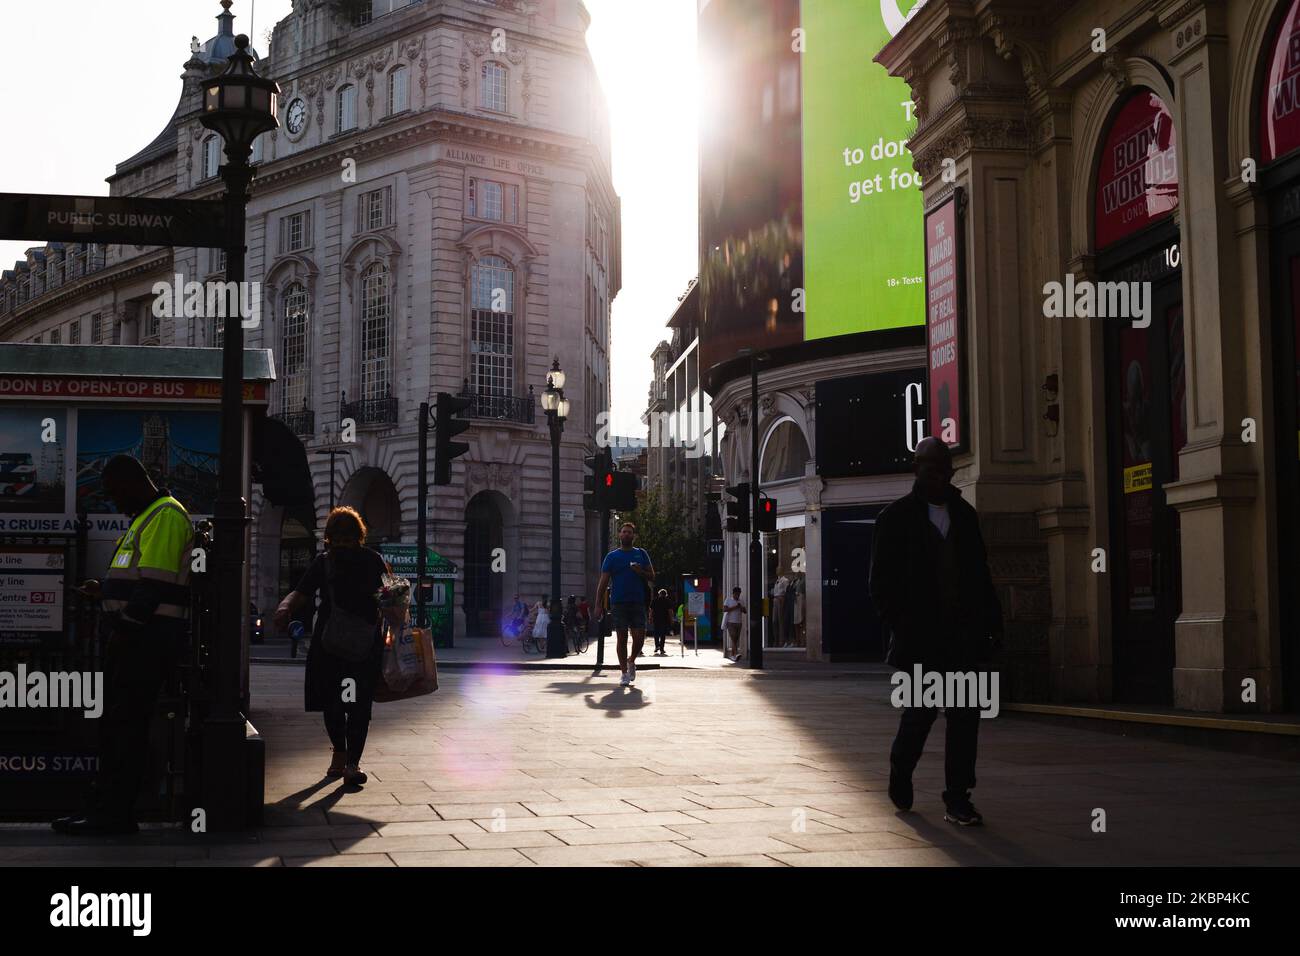 People walk through a near-deserted Piccadilly Circus in London, England, on May 21, 2020. Coronavirus cases are believed to be dropping to very low levels across the capital, with none at all recorded this Monday, according to data from Public Health England, and media reporting yesterday that six major London hospitals had recorded no covid-19 deaths for the previous 48 hours. UK-wide deaths meanwhile stand at 36,042 according to the daily total released this afternoon by the Department of Health and Social Care. (Photo by David Cliff/NurPhoto) Stock Photo